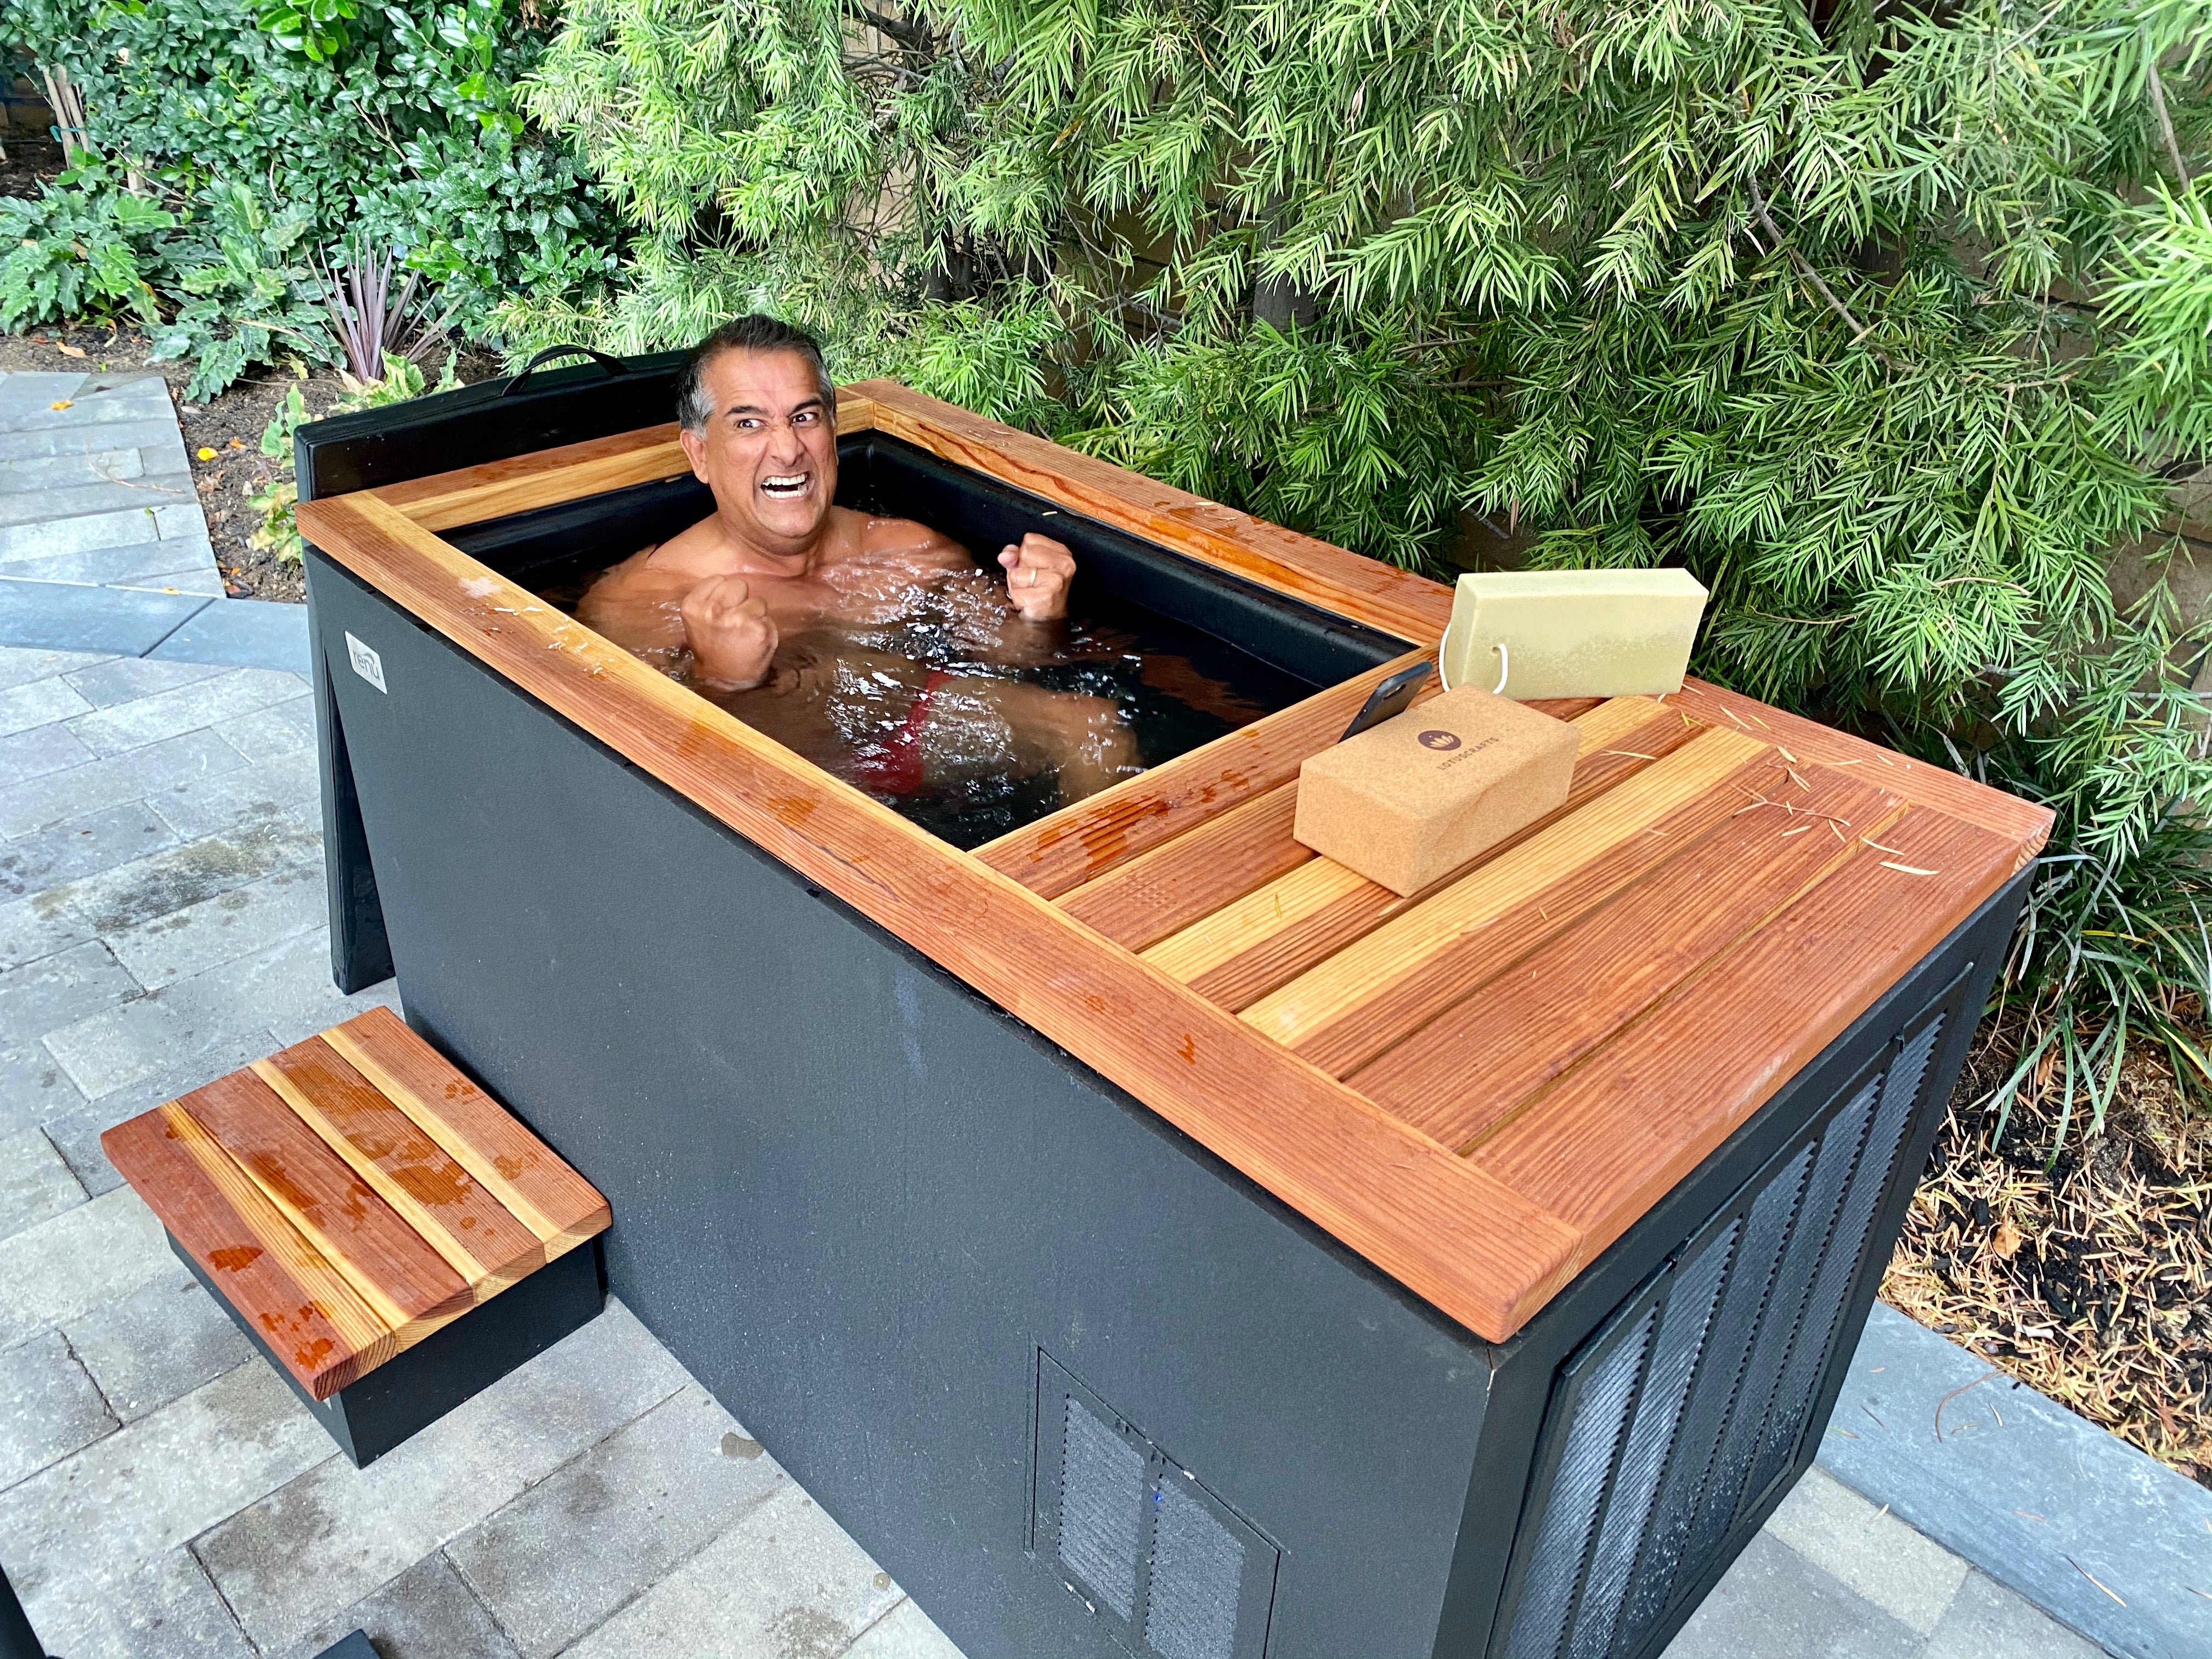 We Found The Best Cold Plunge Tubs Of 2023